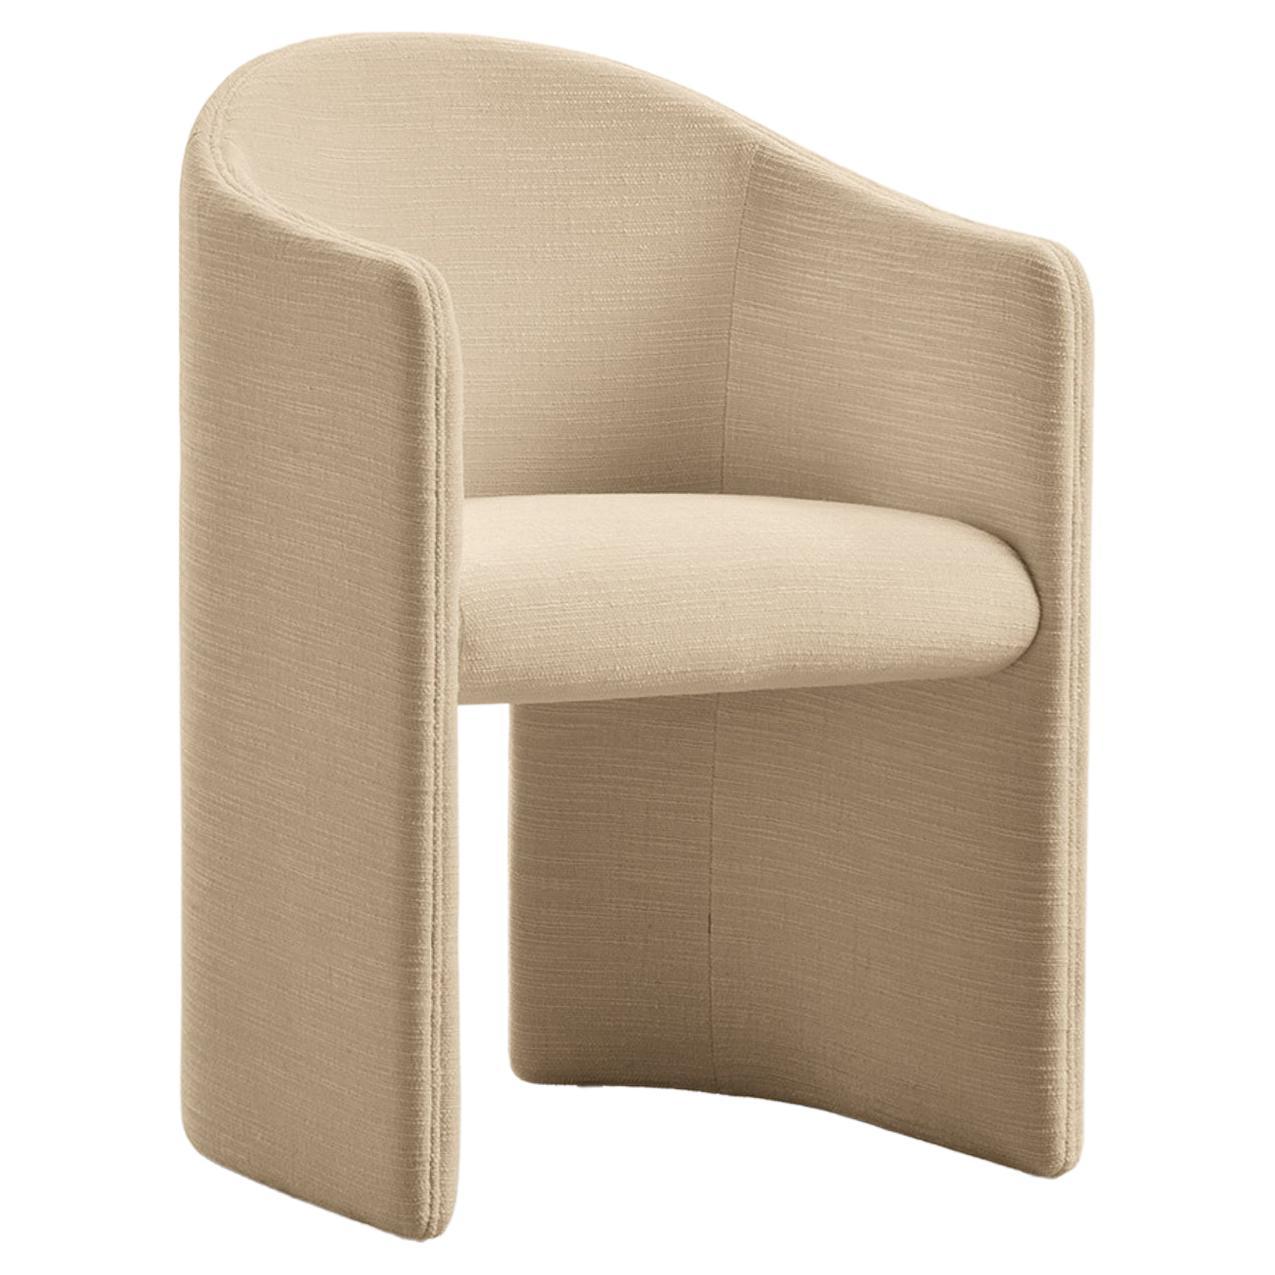 Brera, rounded chair in fabric with groove, DainelliStudio for Somaschini, Italy For Sale